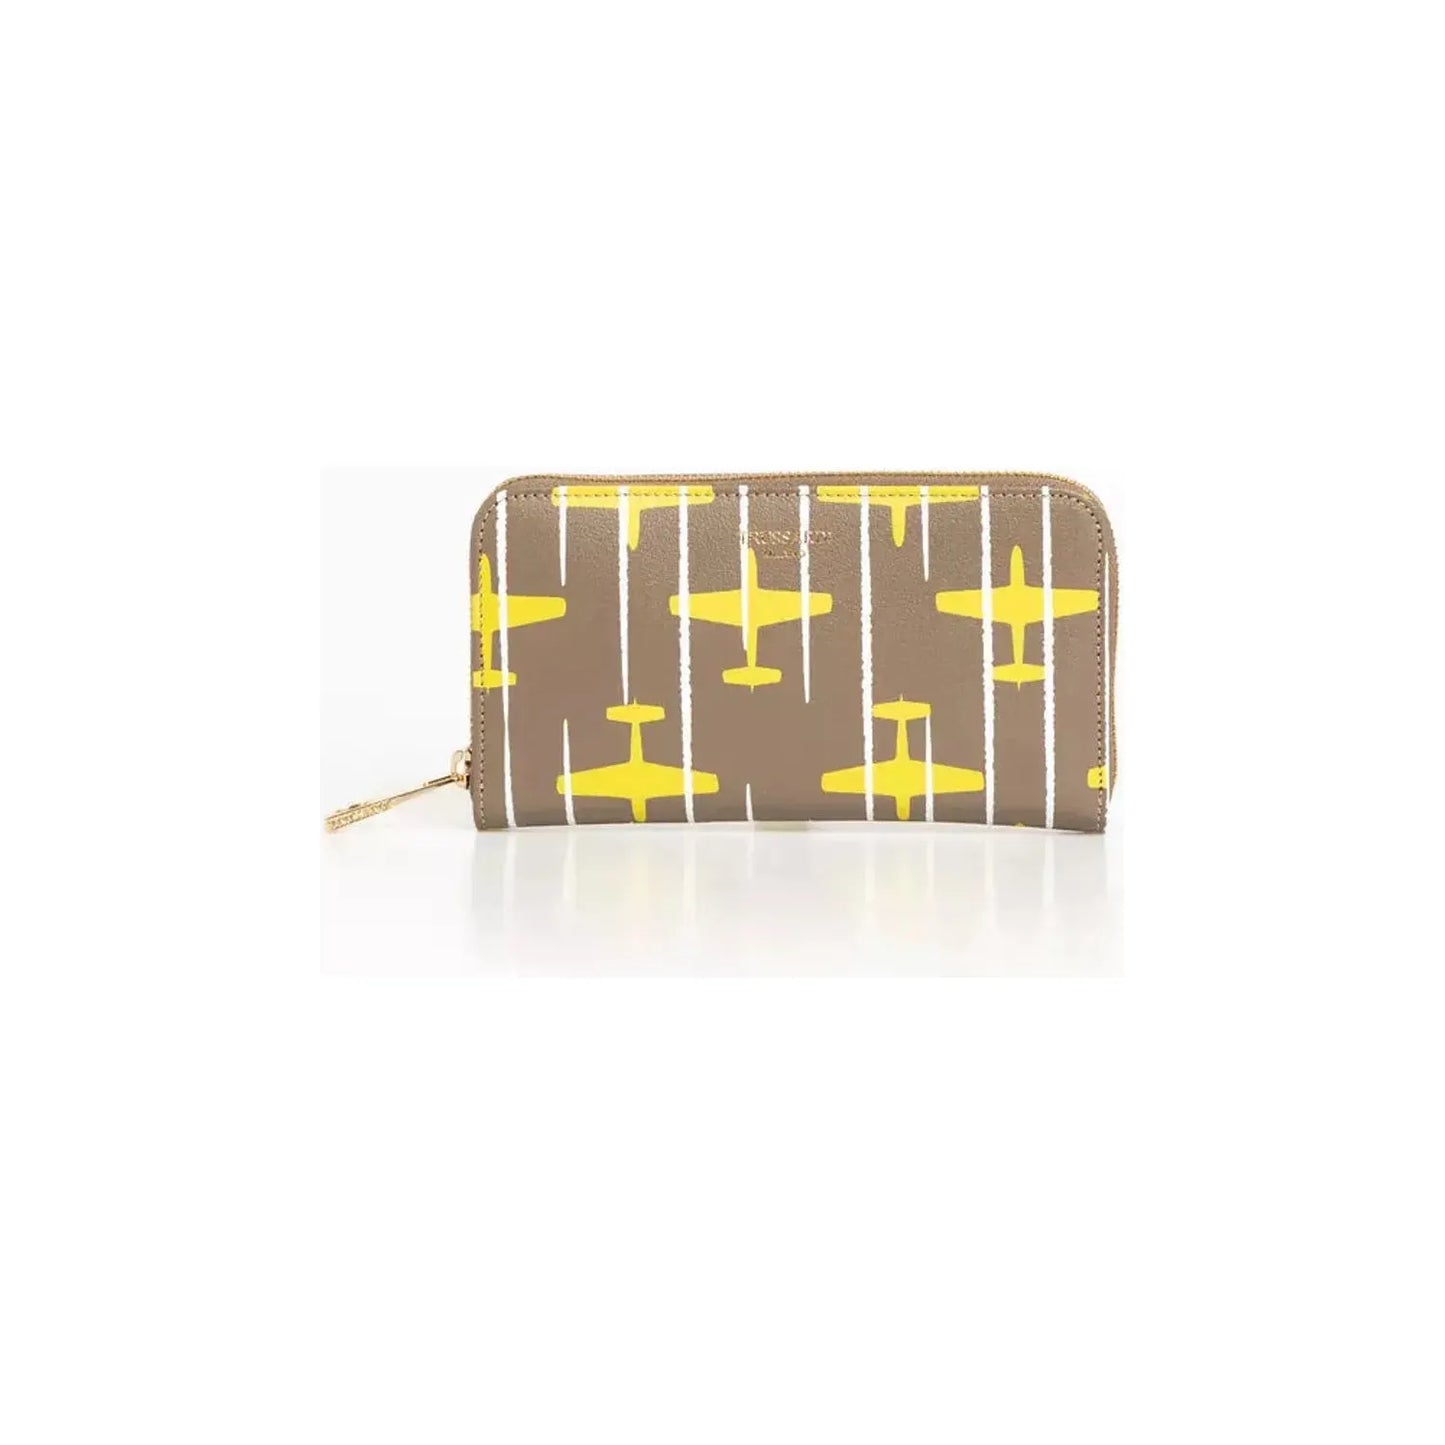 Trussardi Elegant Striped Leather Zip Wallet y-yellow-leather-wallet Wallet stock_product_image_21531_2066337713-28-5b10c435-f27.webp